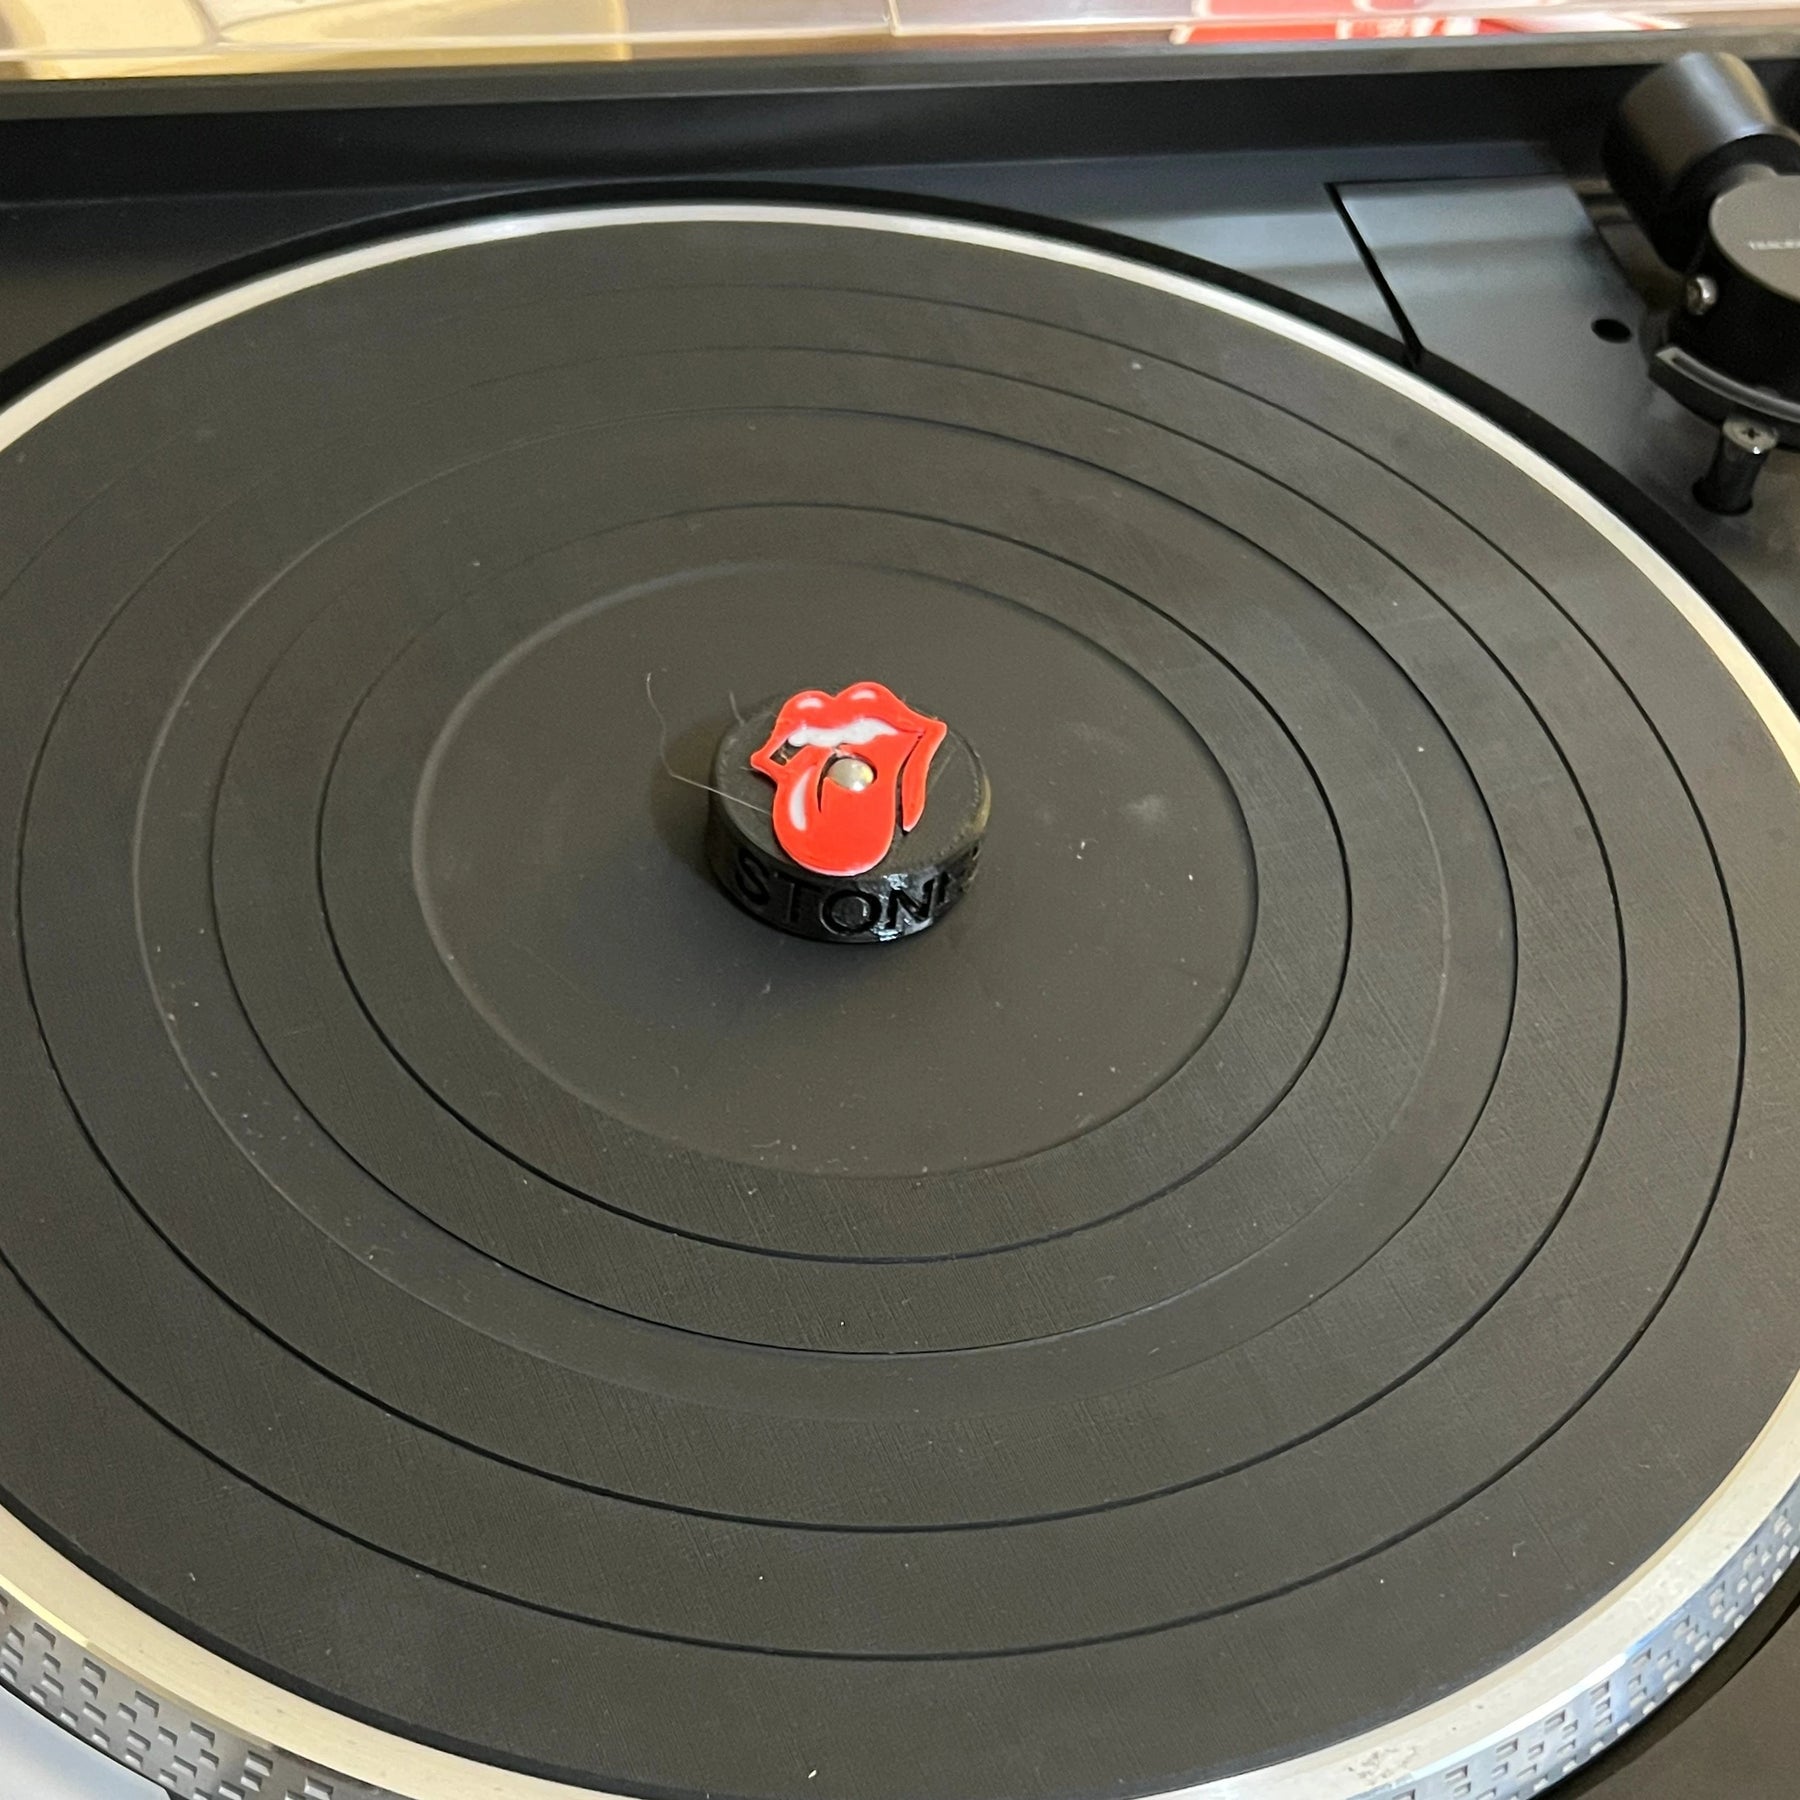 The Rolling Stones 45 rpm Adapter